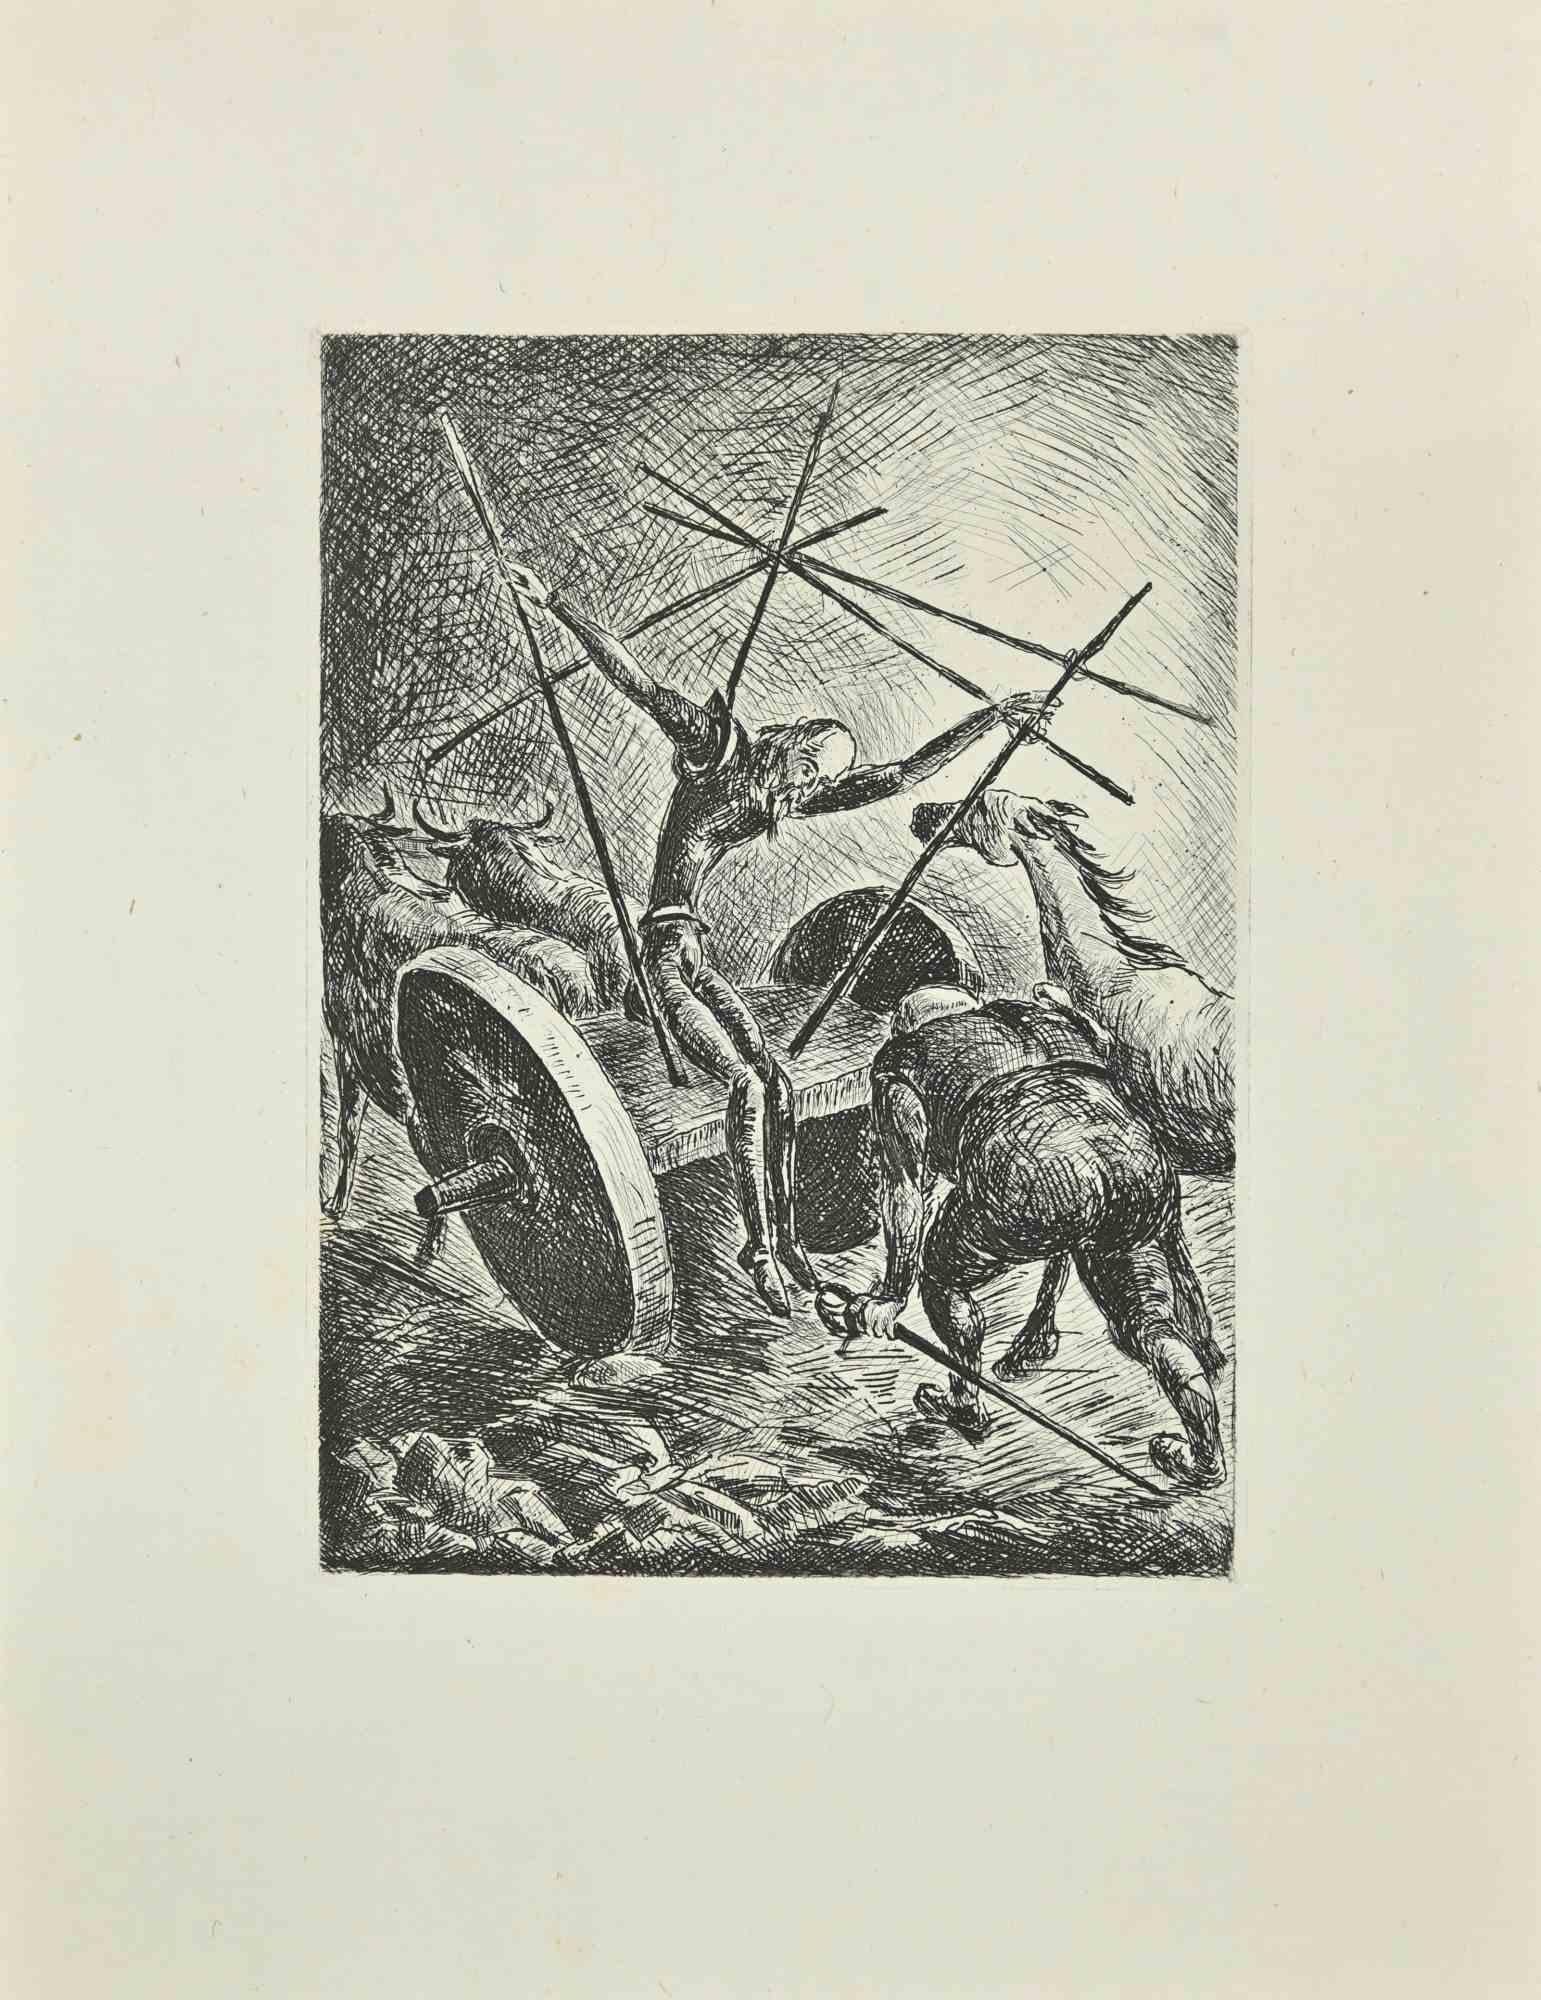 Don Quixote in the Chariot  is an etching and drypoint print on ivory-colored China paper, realized by Wladyslaw Jahl in 1951.

They belong to a limited edition of 125 specimens.

Good conditions.

The artwork represents a visual scene from Don